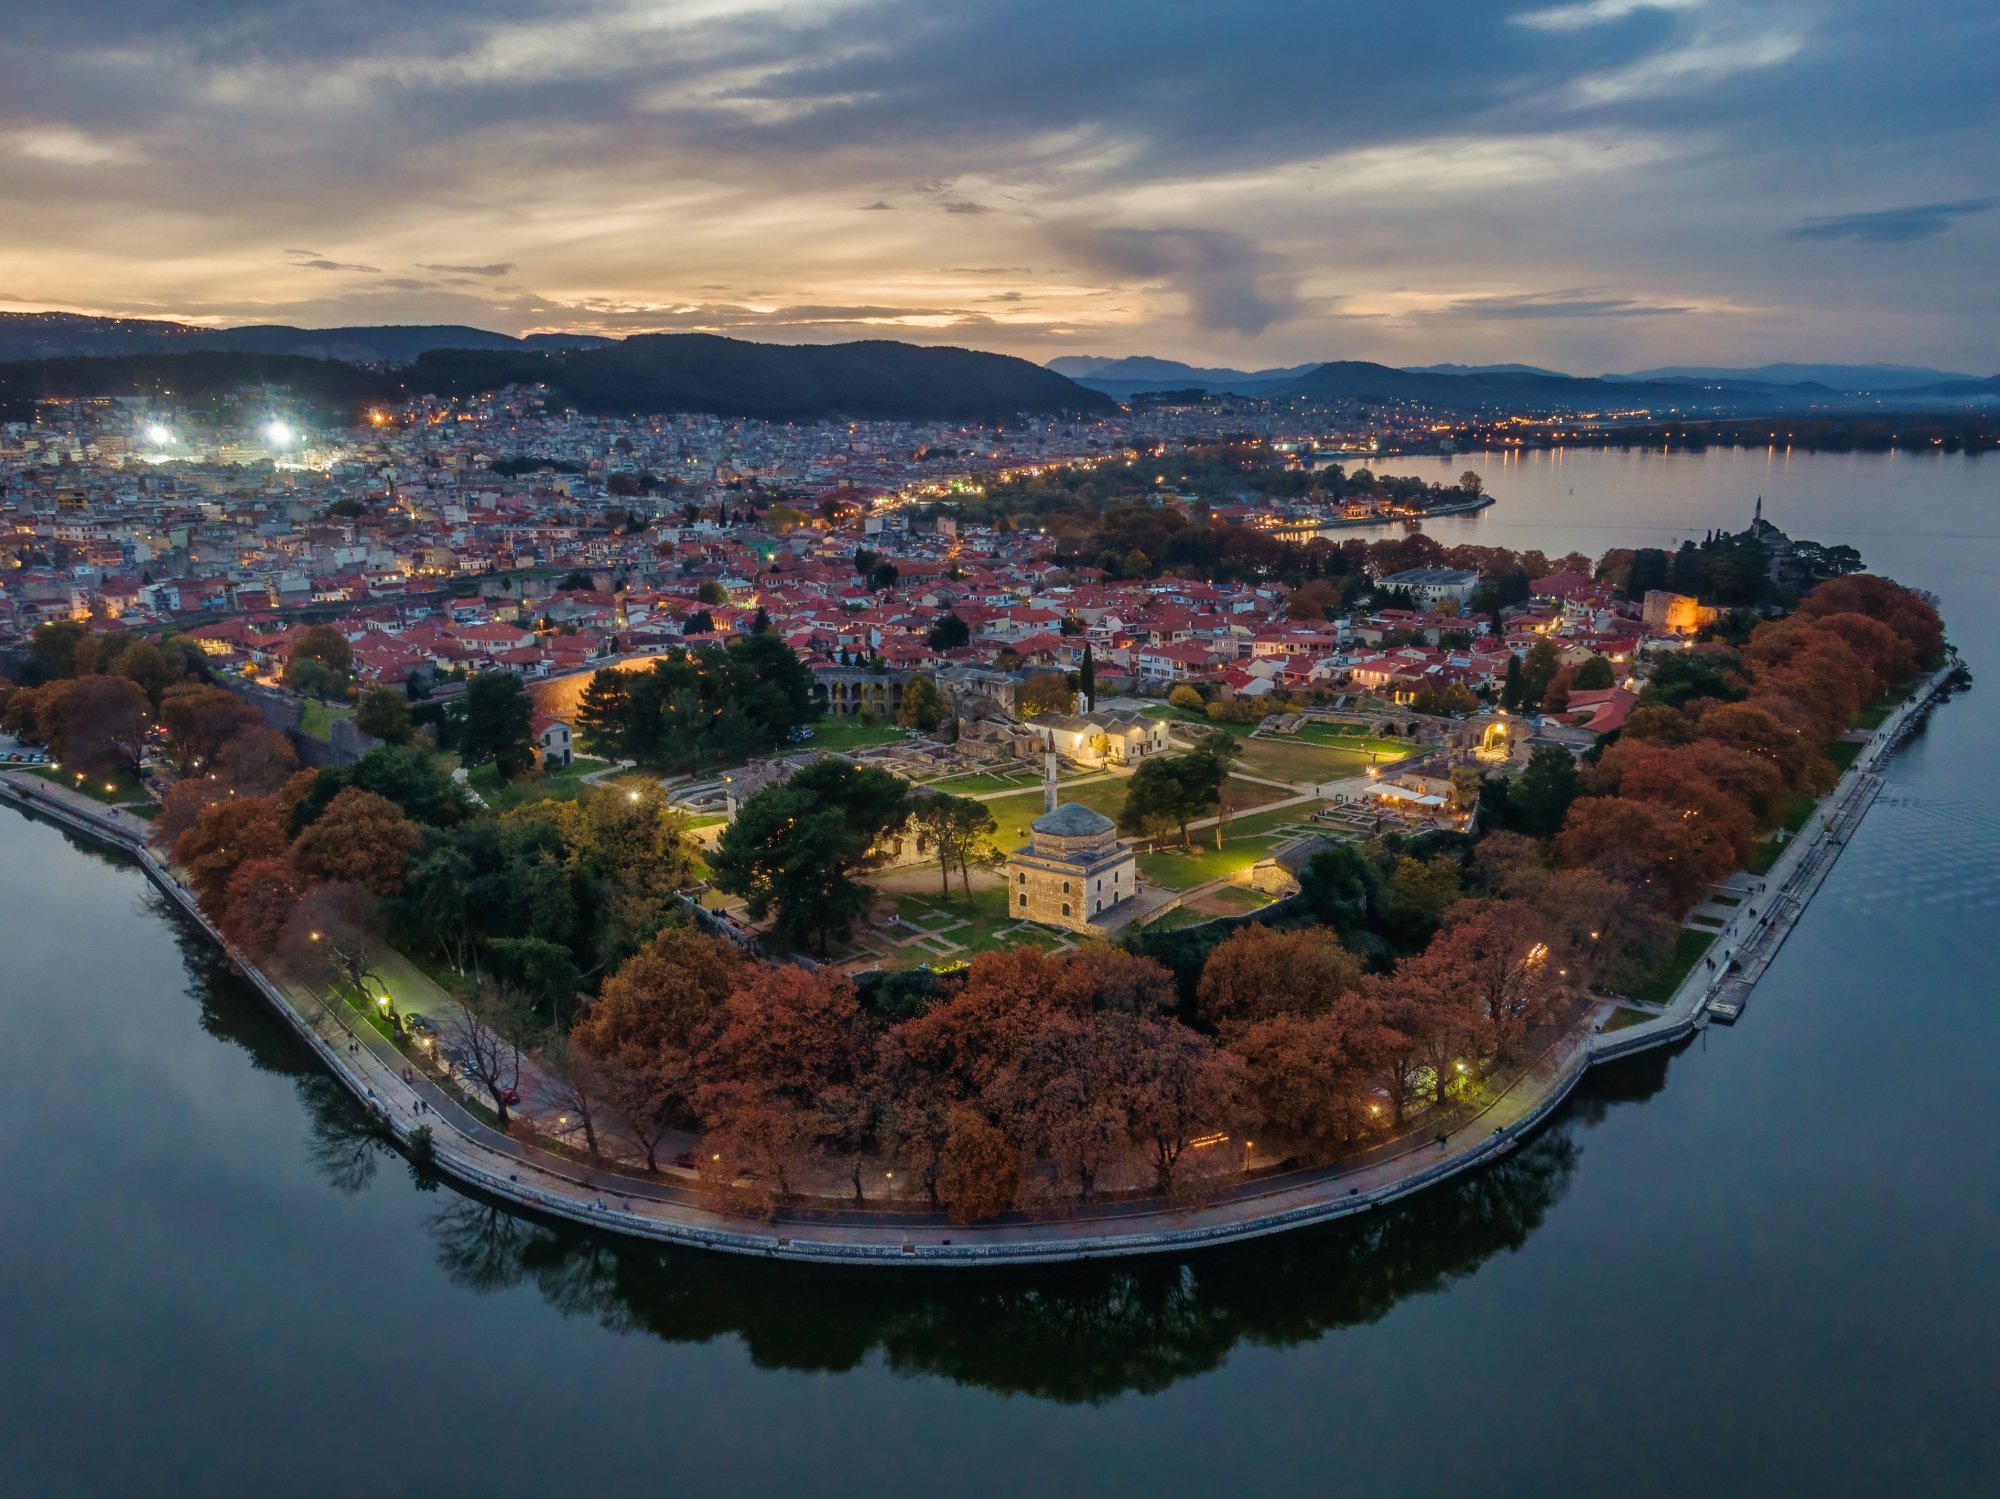 Ioannina: The silicon valley of Greece